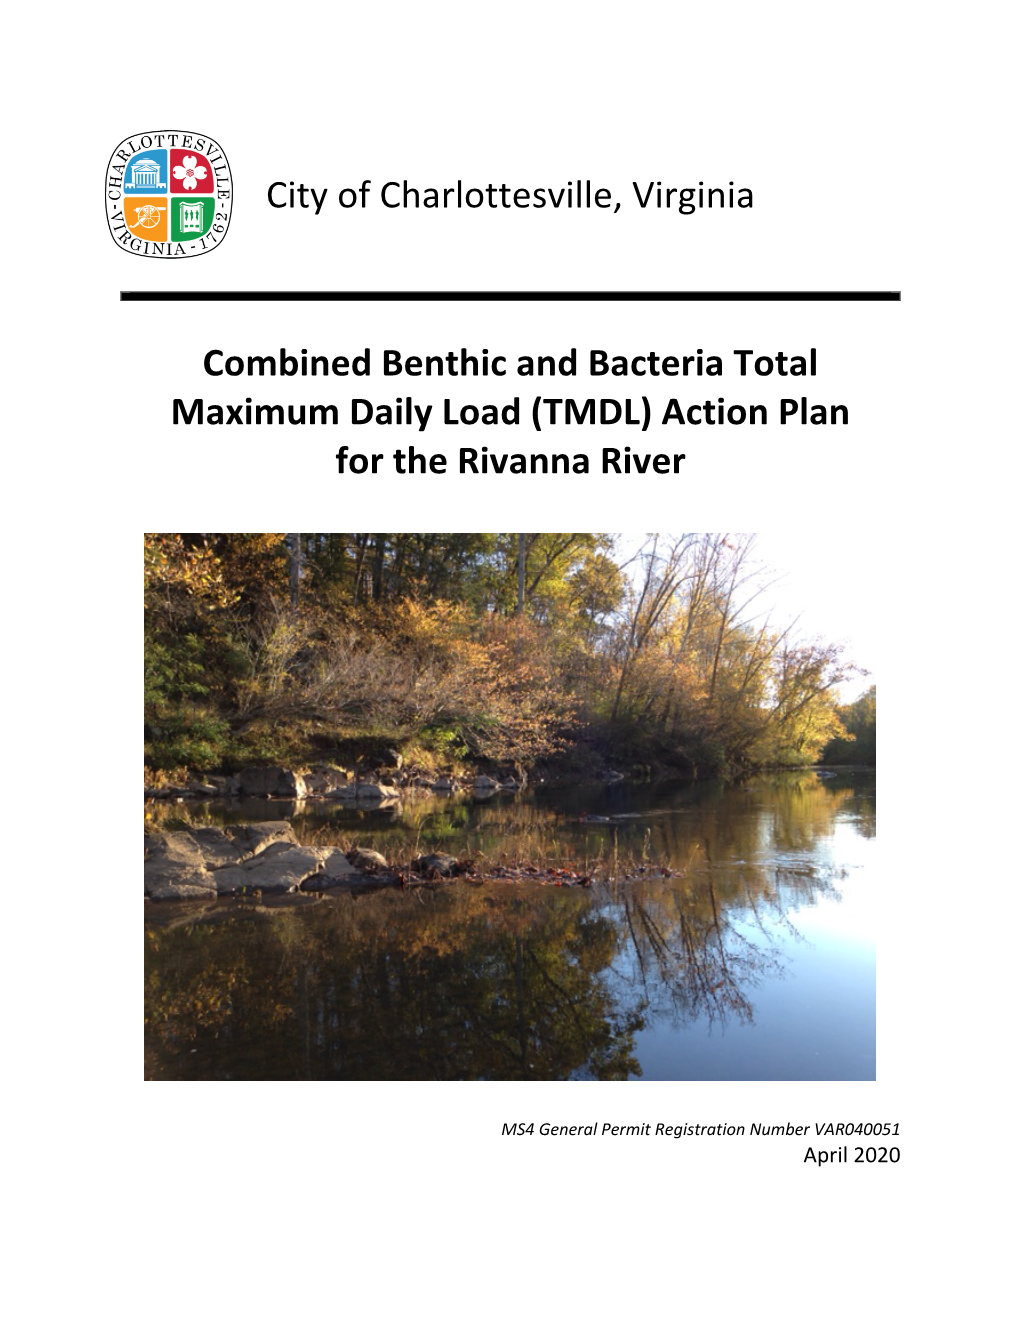 (TMDL) Action Plan for the Rivanna River